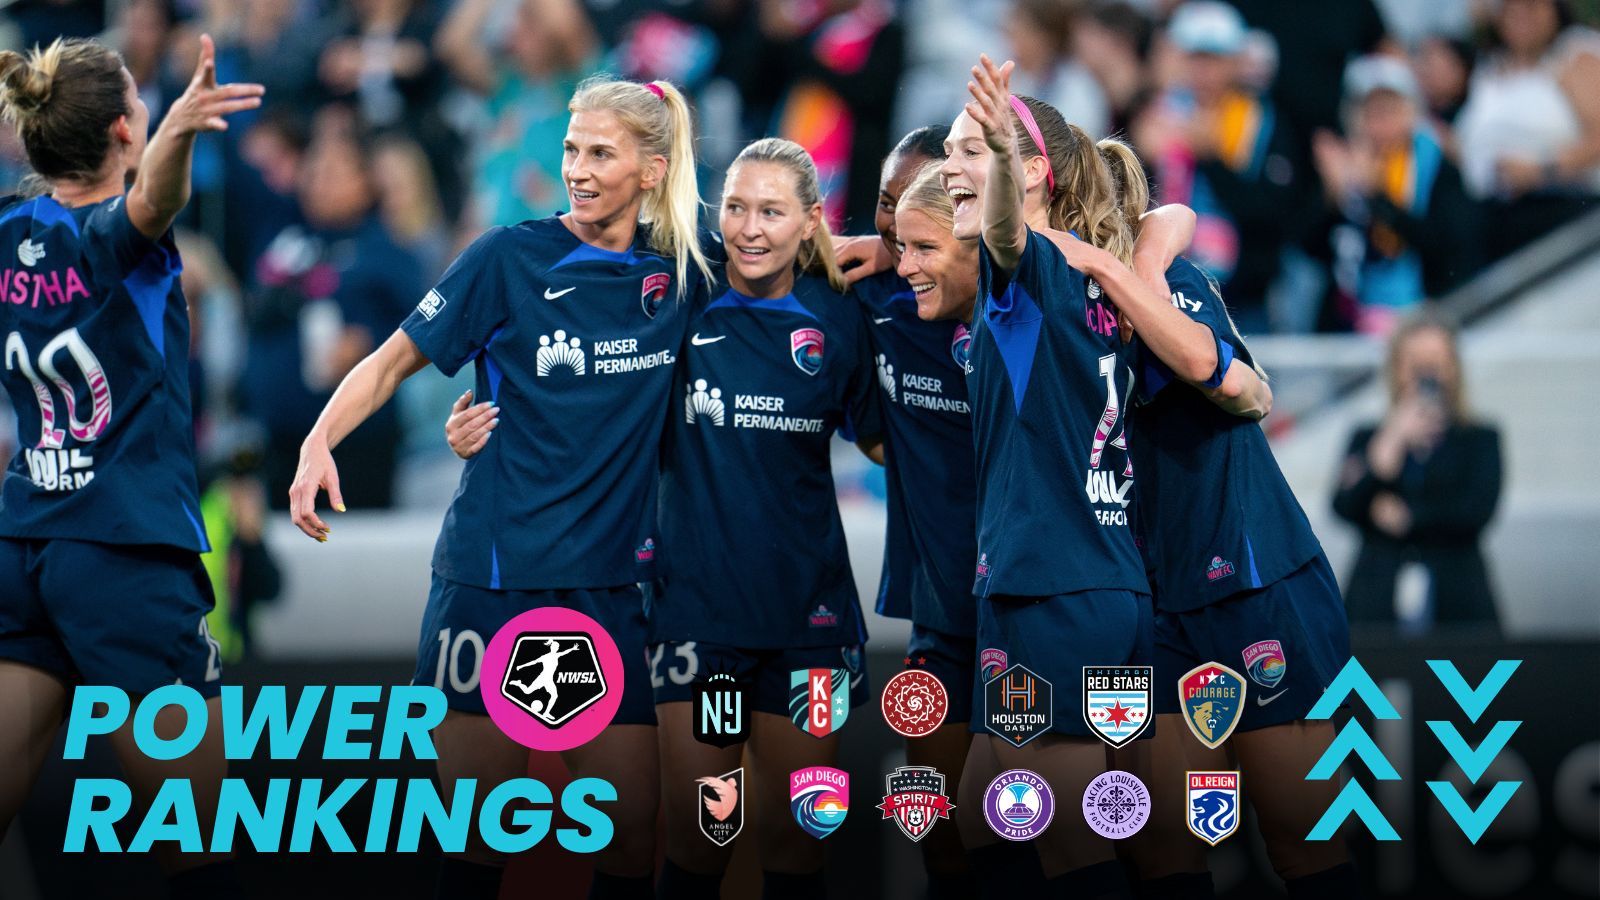 The NWSL season is underway. The Thorns picked up where they left